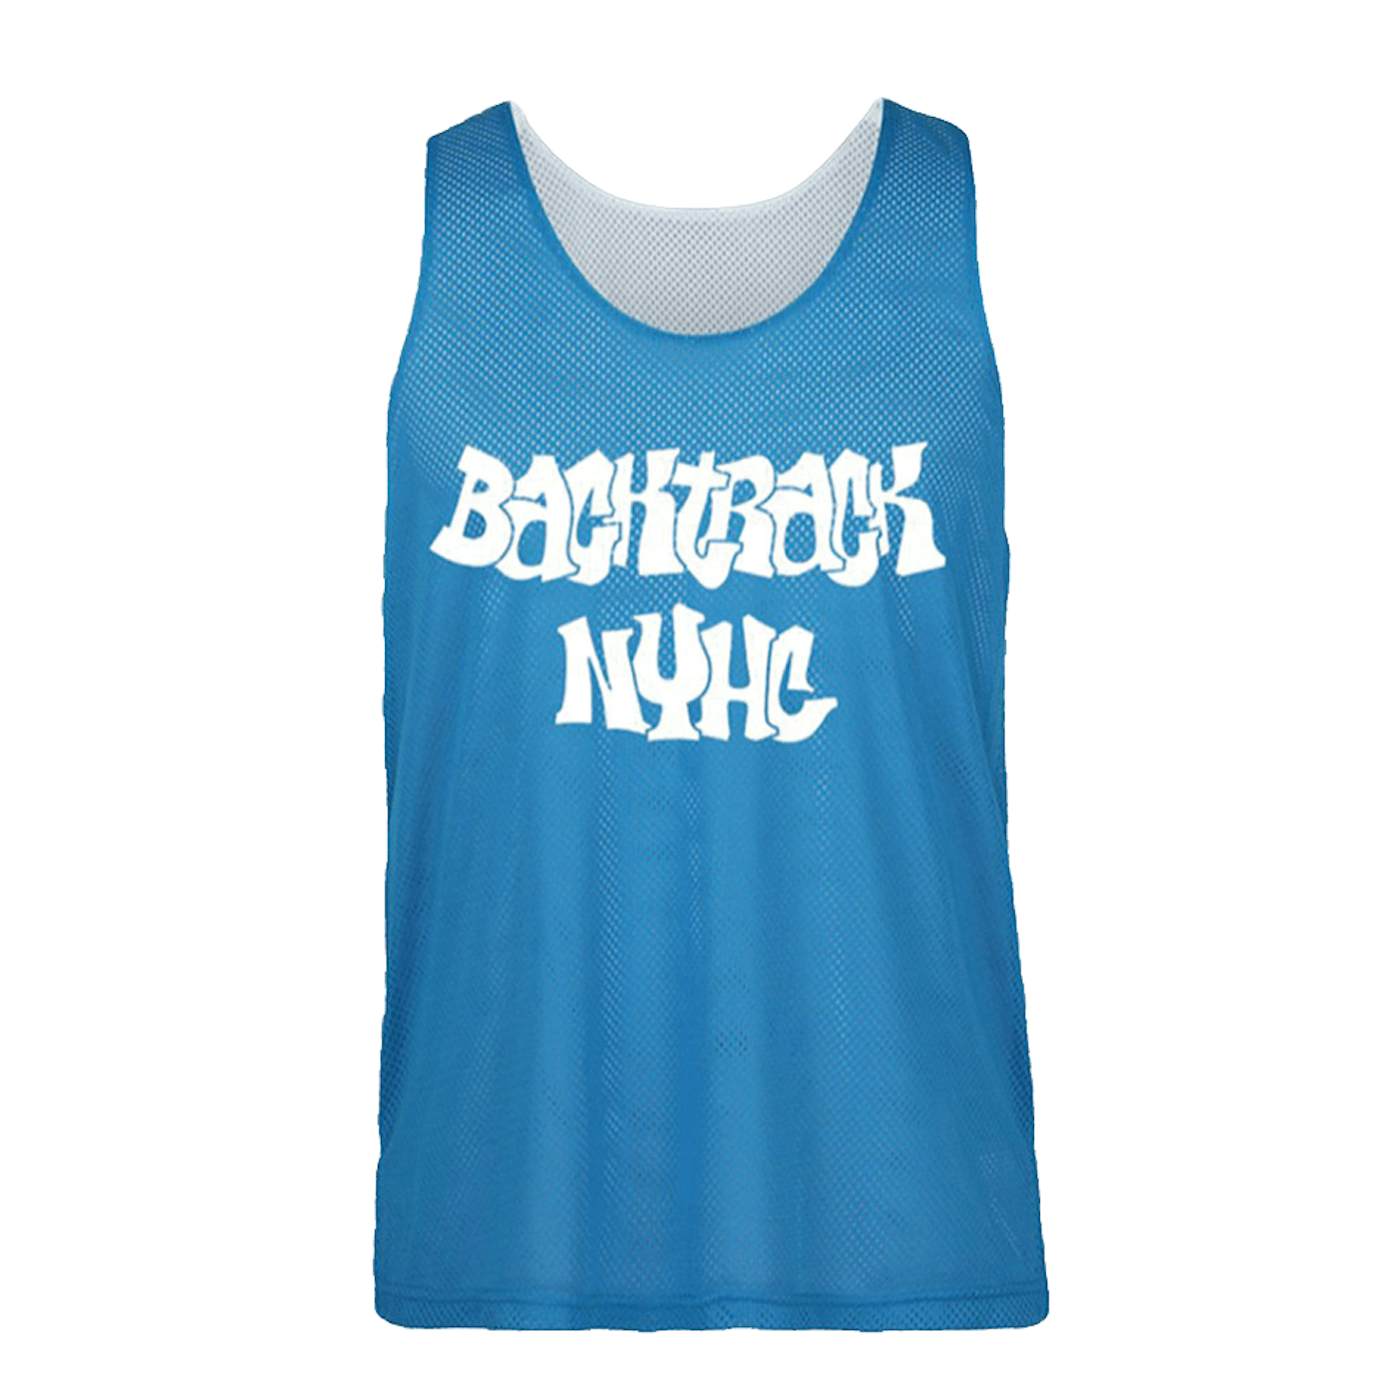 "Backtrack Rules" Basketball Jersey